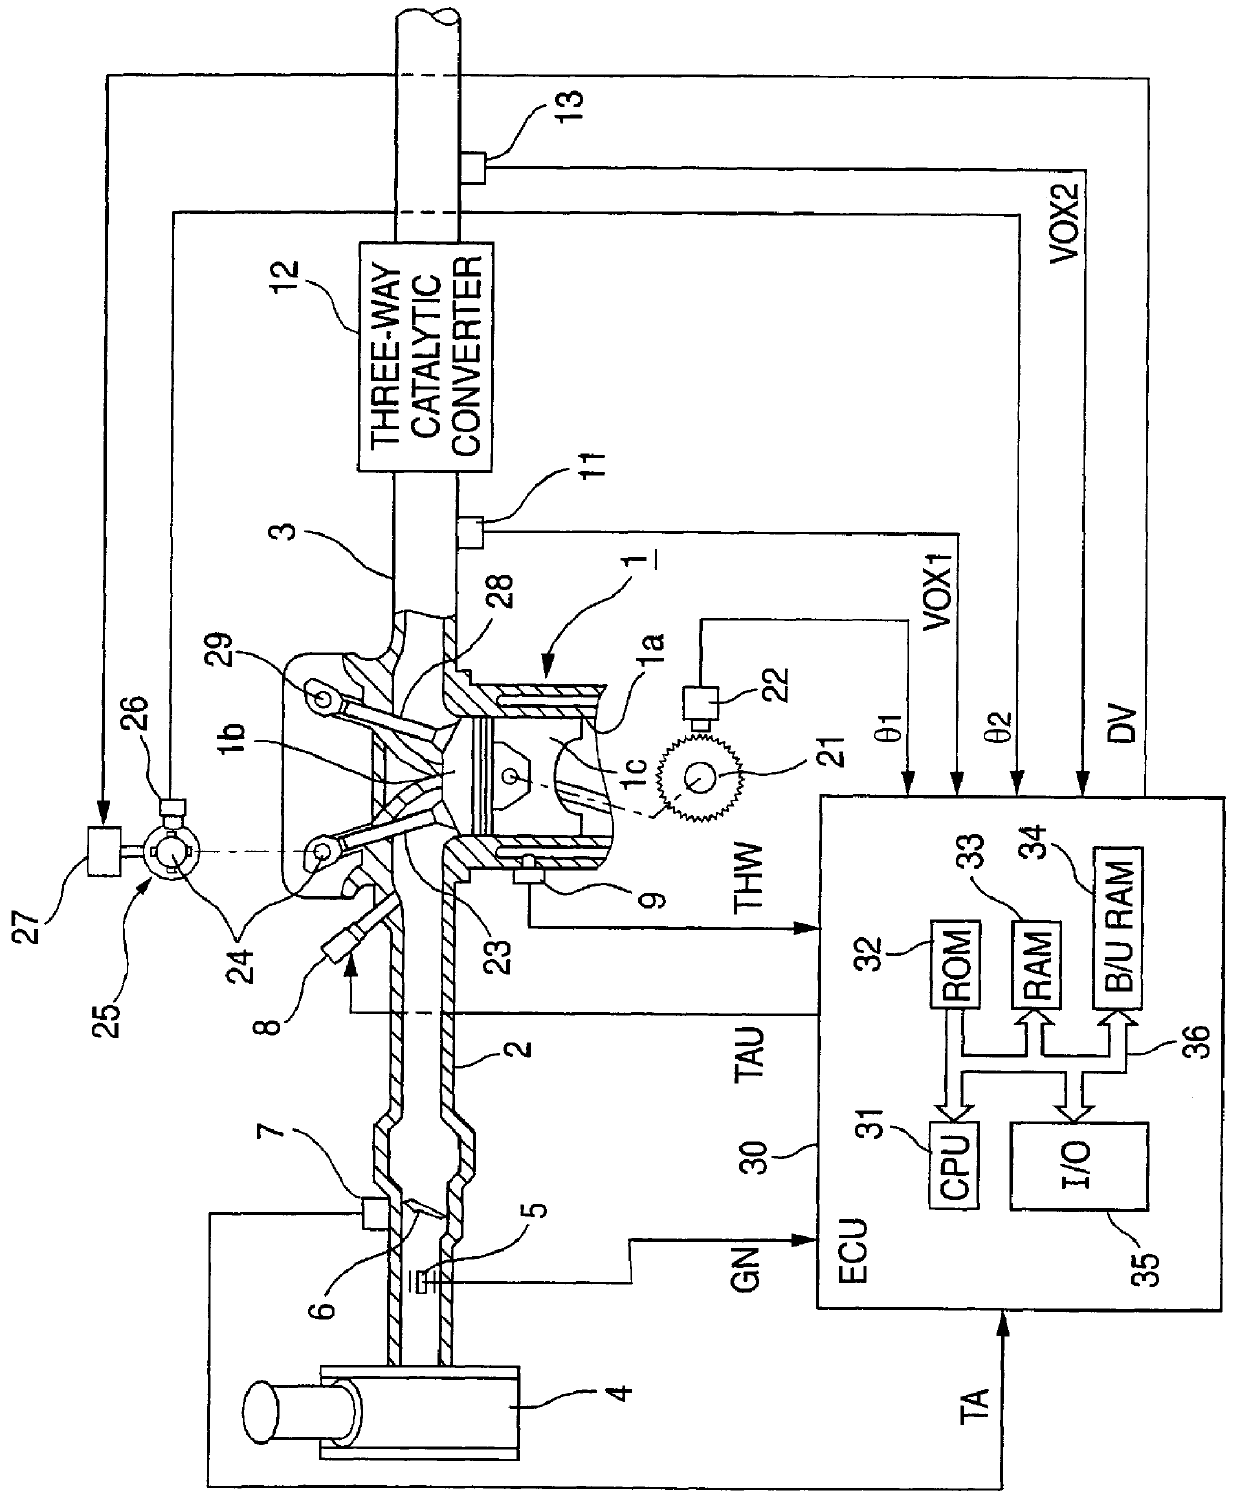 Valve timing control apparatus for an internal combustion engine